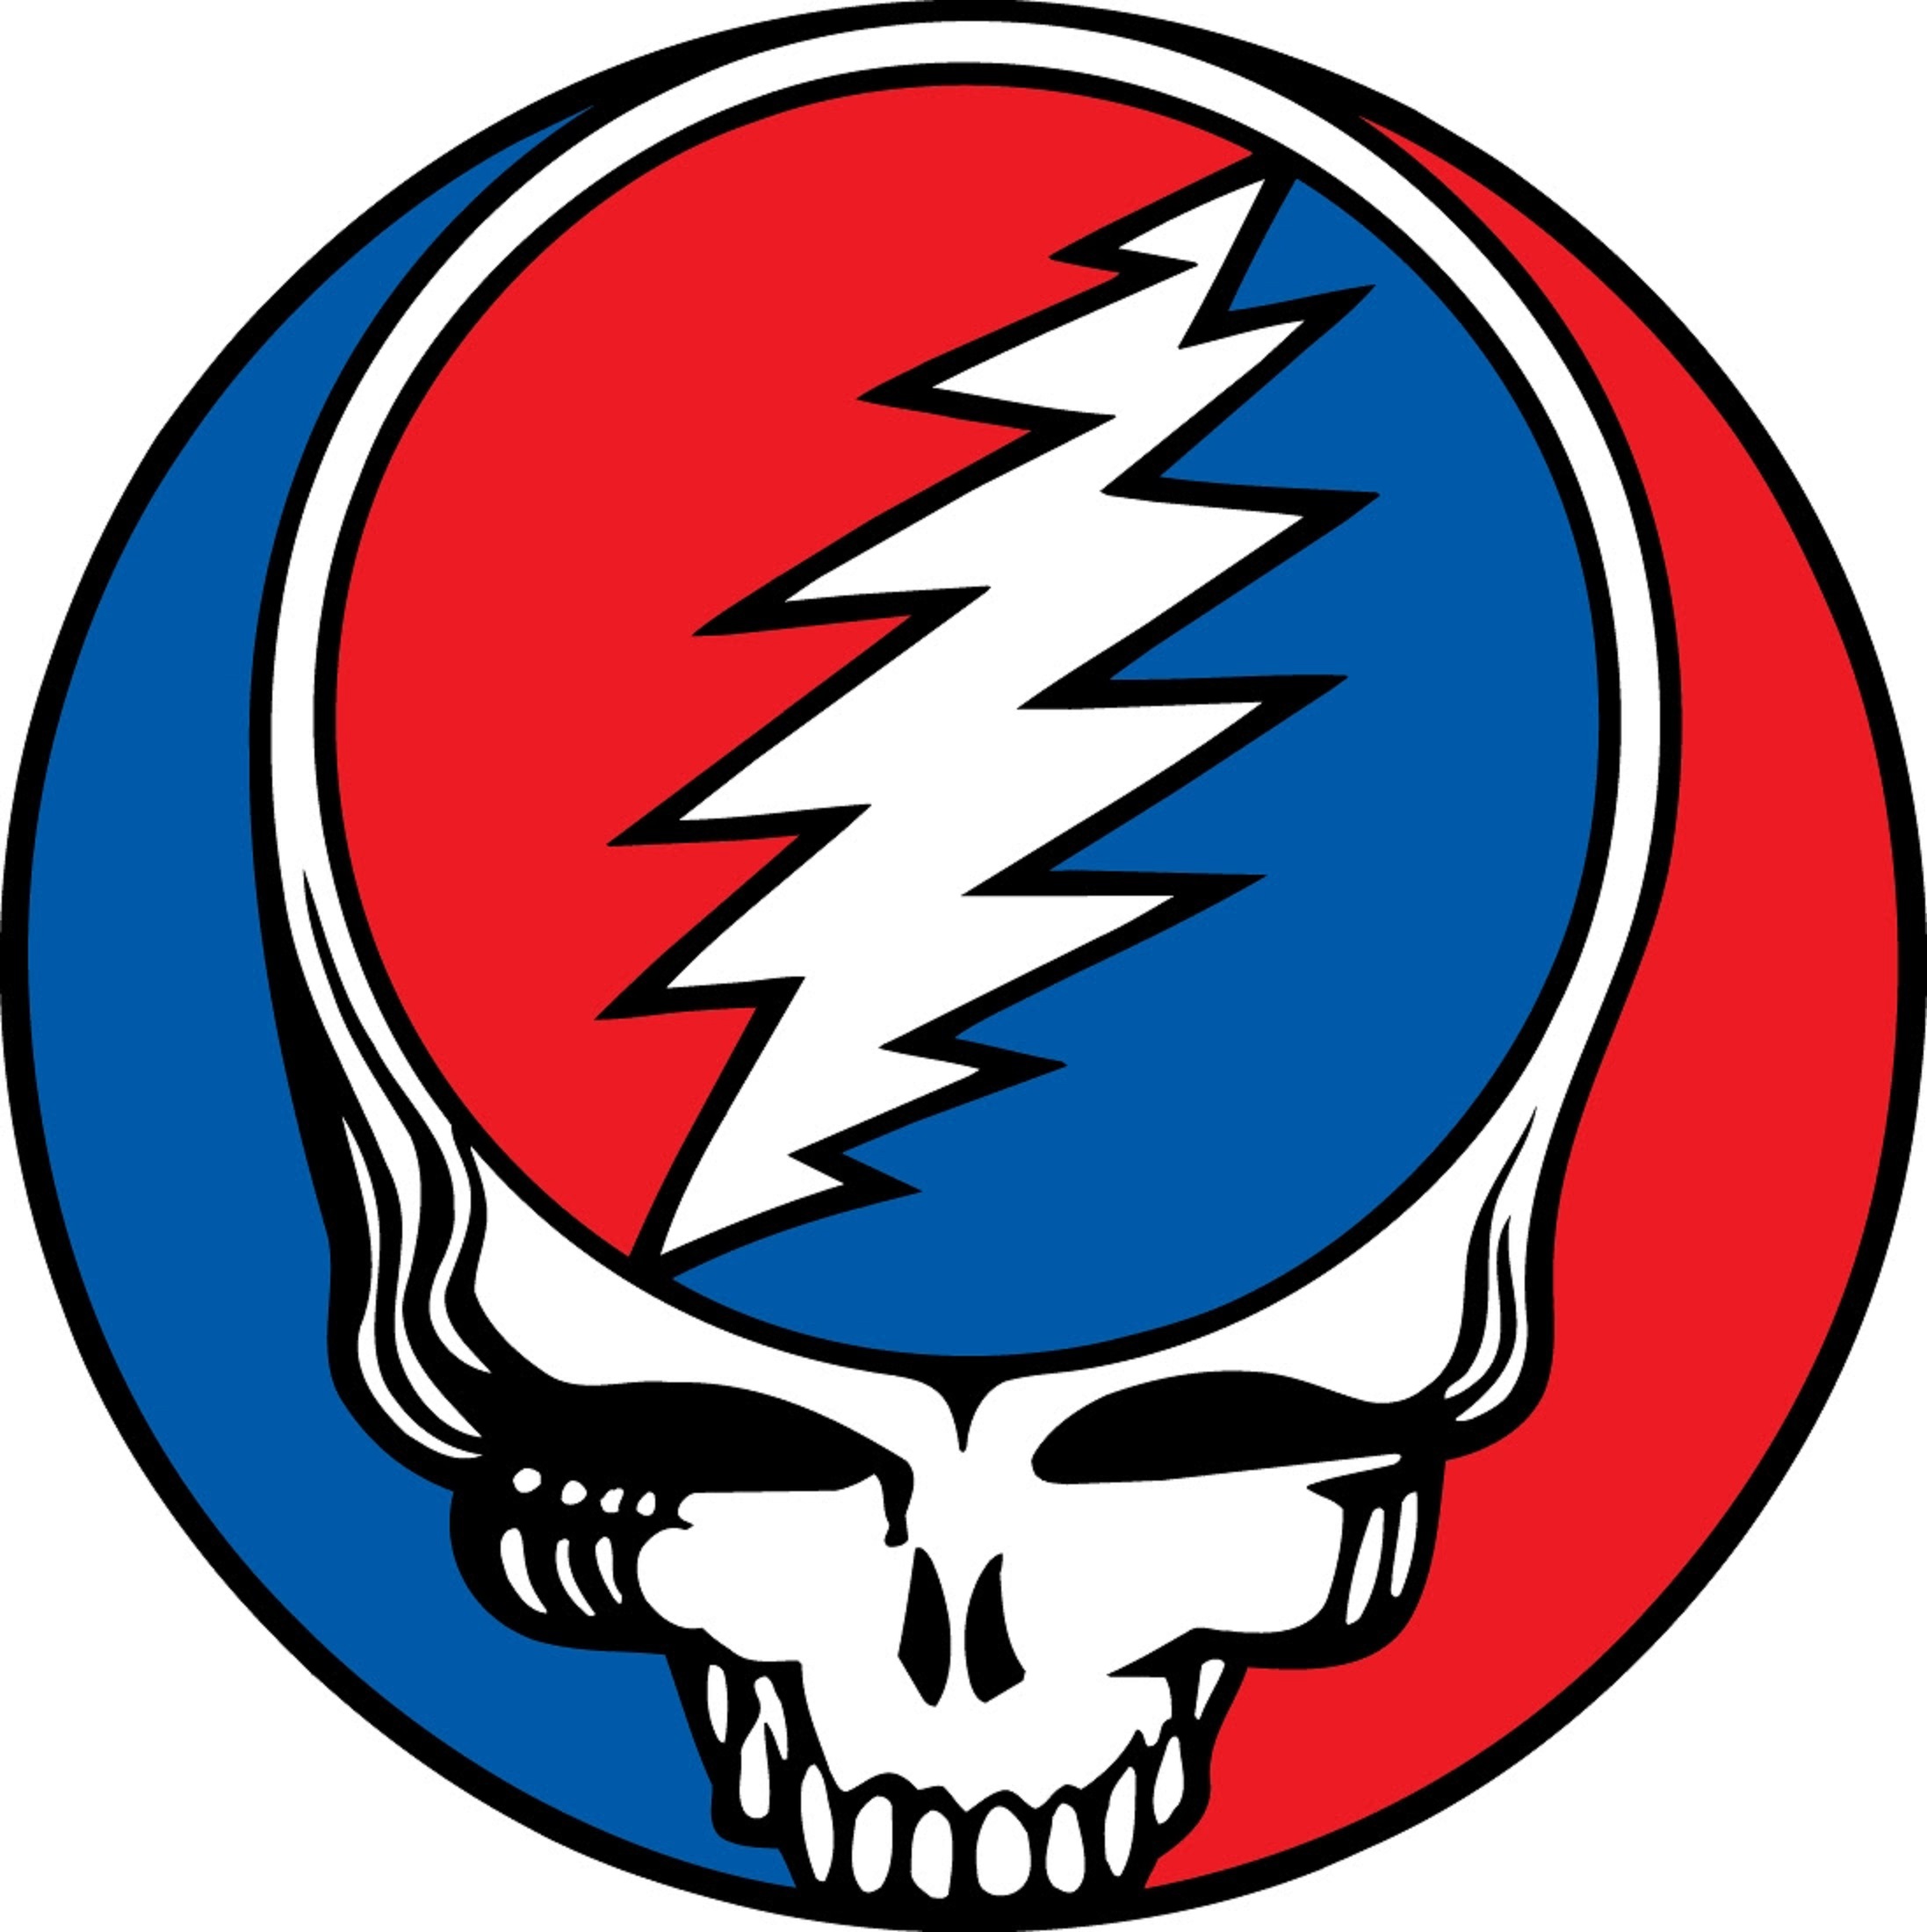 The Grateful Dead Tie Record For Most Top 40 Albums on Billboard 200